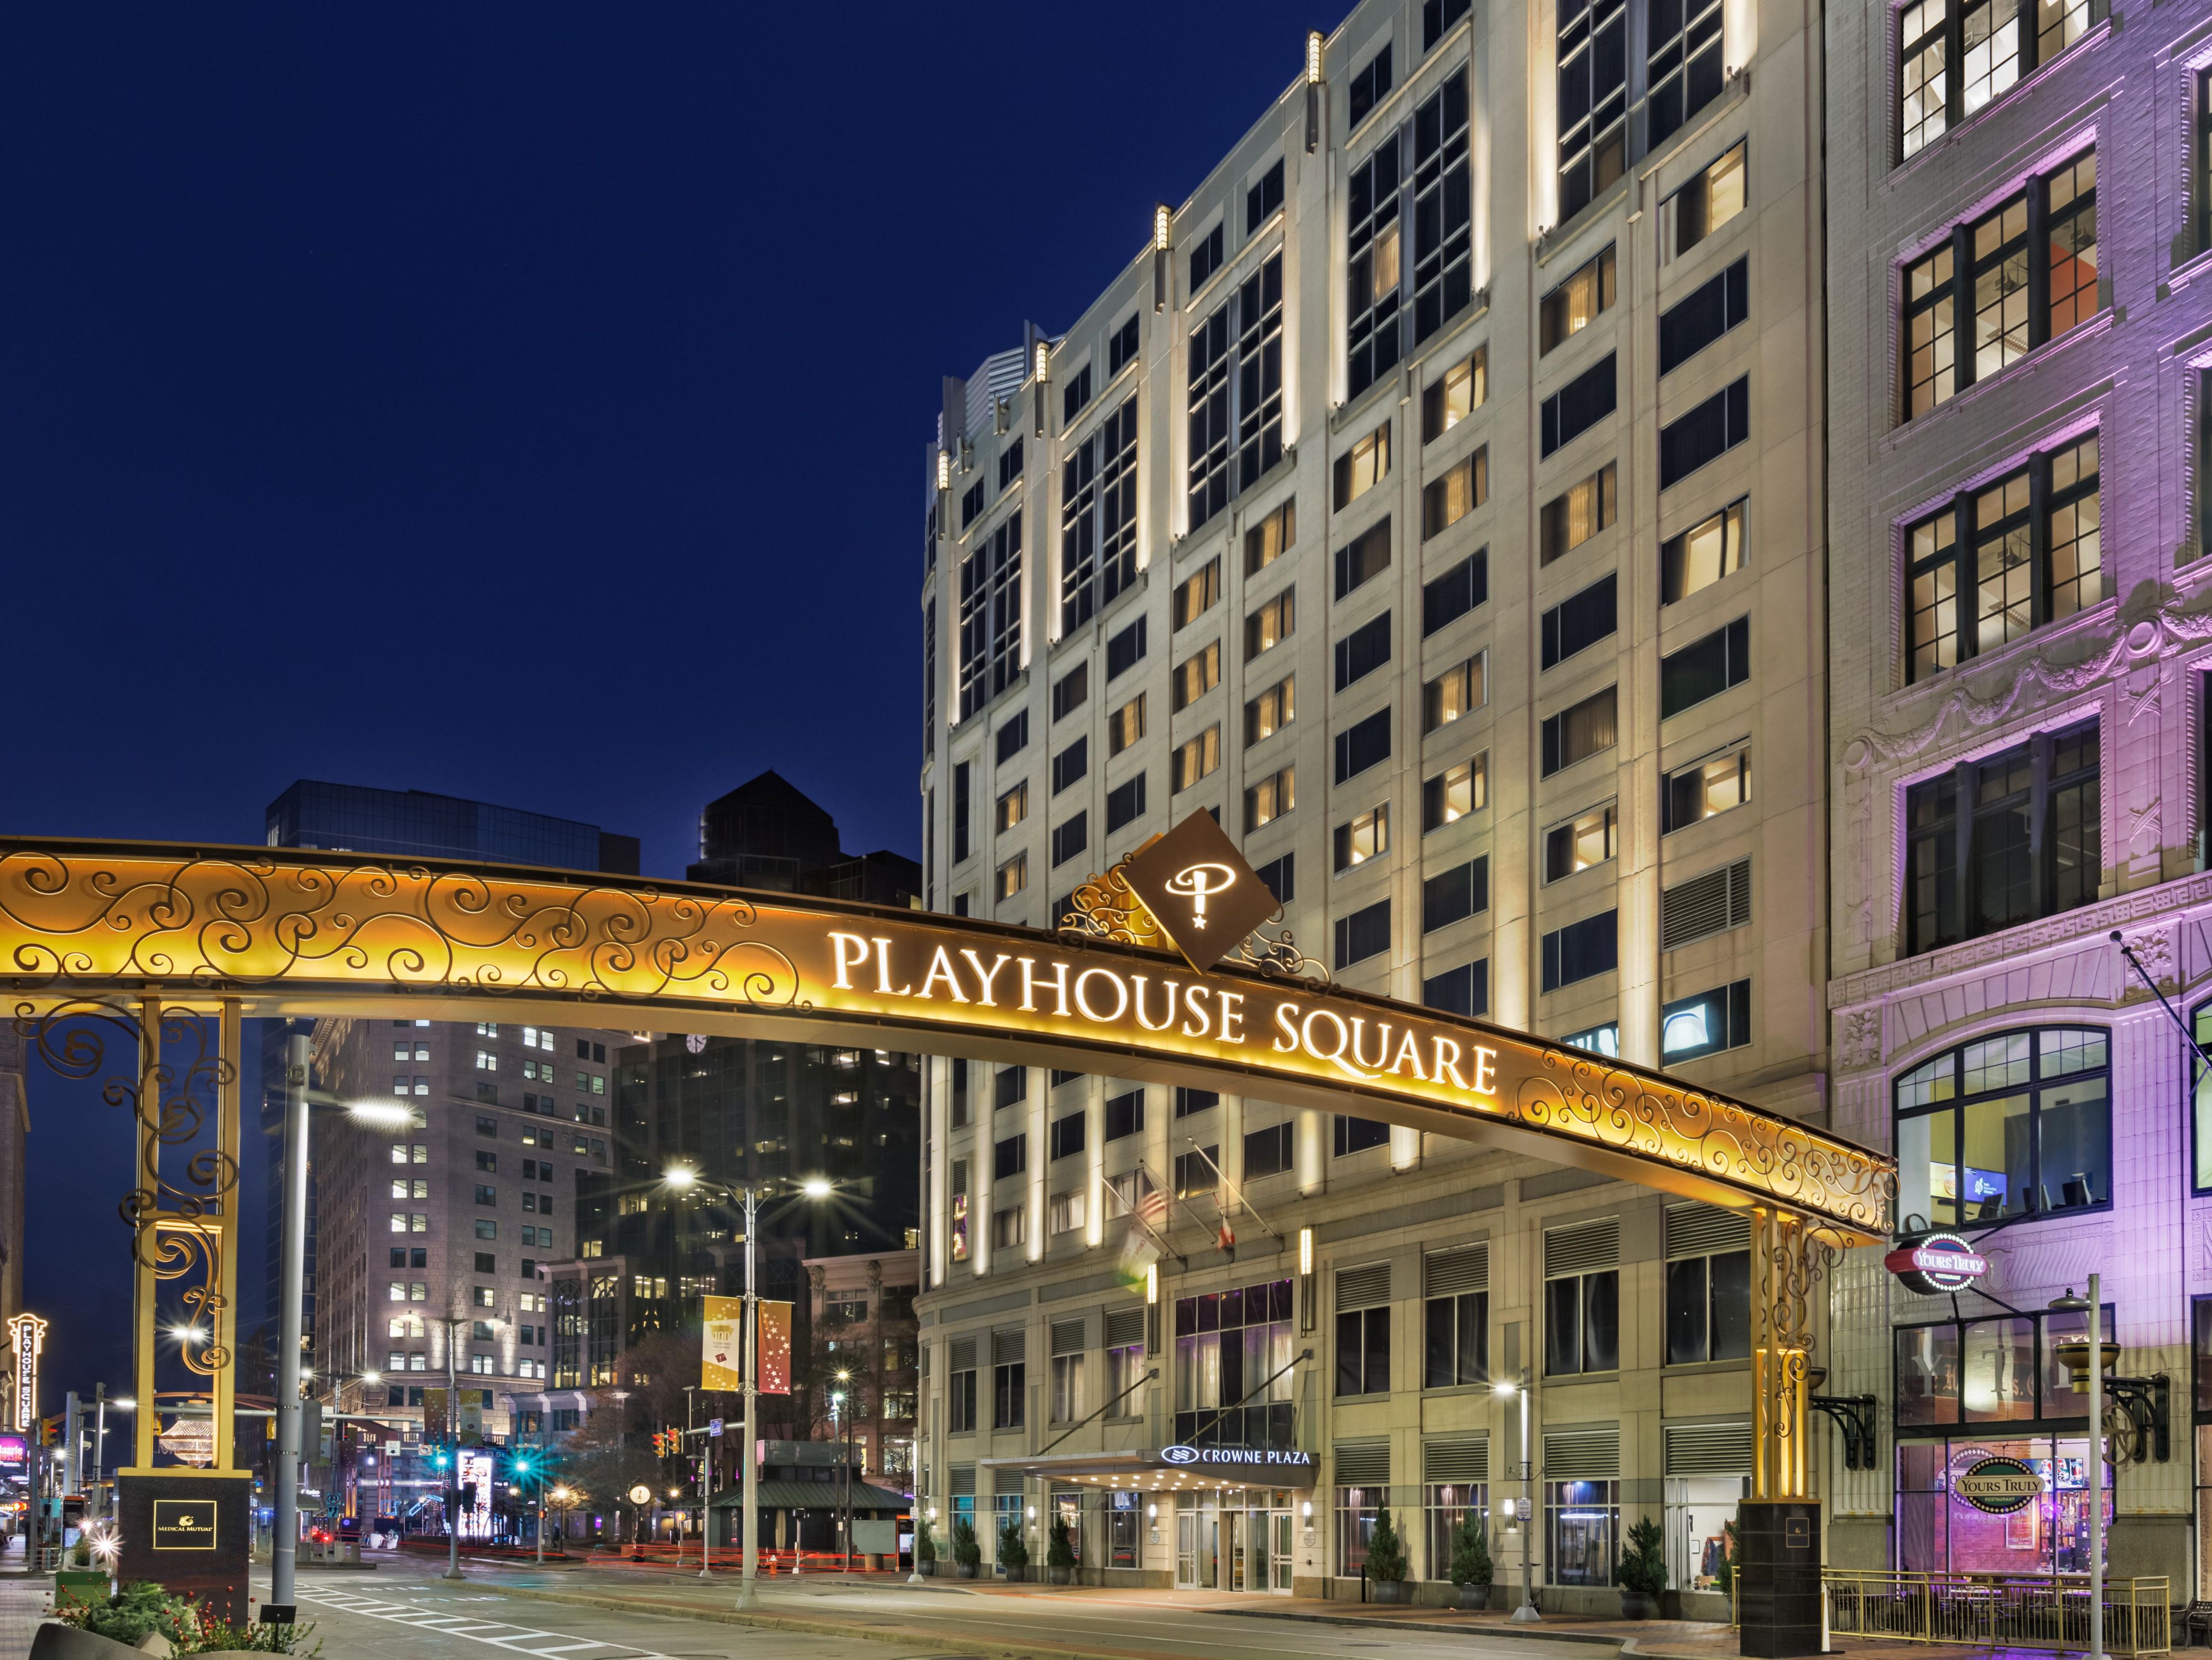 Avoid the trouble of public transportation and stay just a short walk away from the area’s top entertainment. The official hotel of Playhouse Square, Crowne Plaza® Cleveland puts you steps away from the district’s most beloved performance spaces, including Allen Theatre, KeyBank State Theatre, Mimi Ohio Theatre, and more.